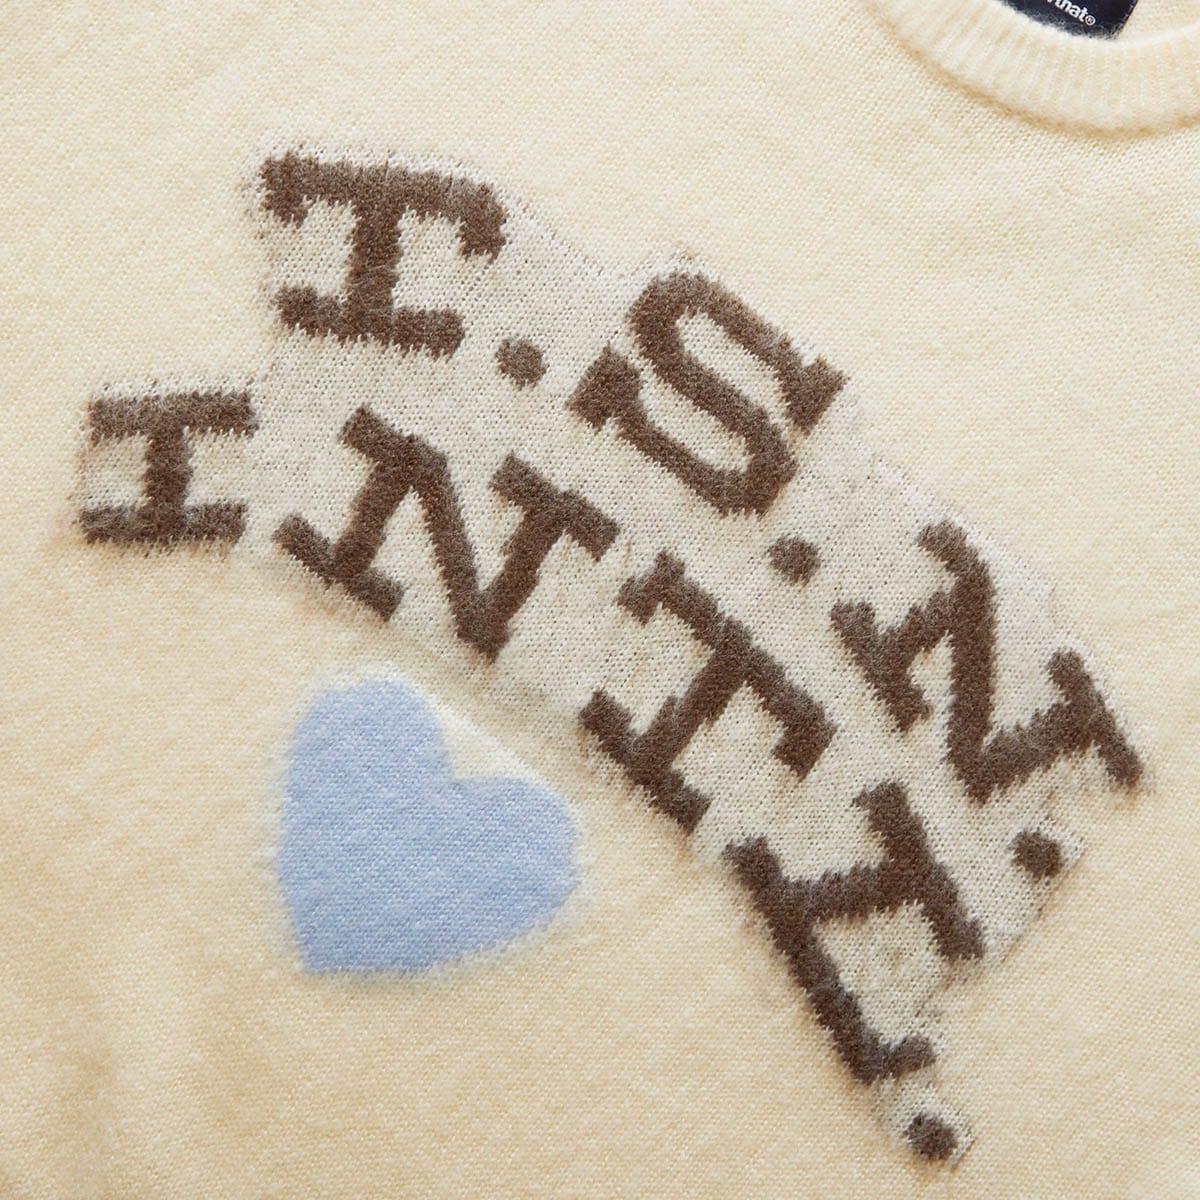 thisisneverthat Knitwear T.S.N. HEART SWEATER